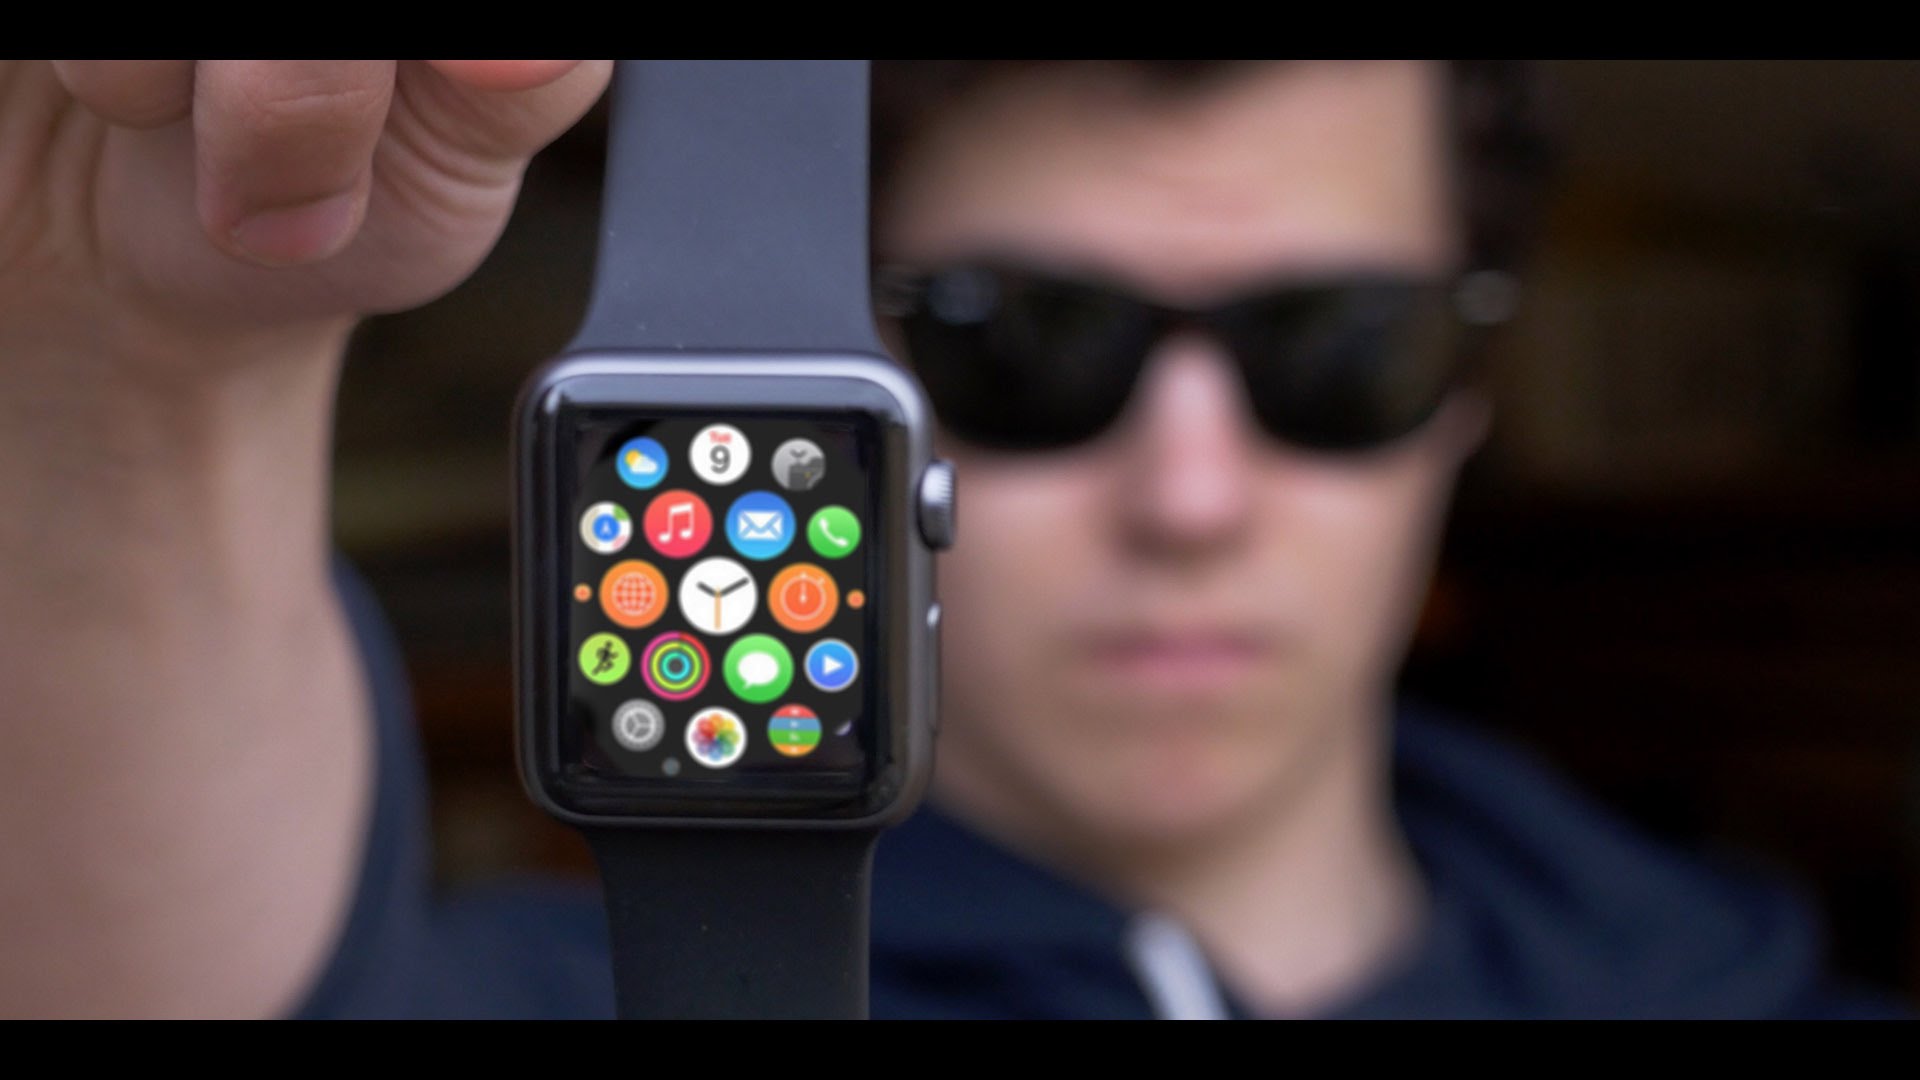 "Why I Hate The Apple Watch"